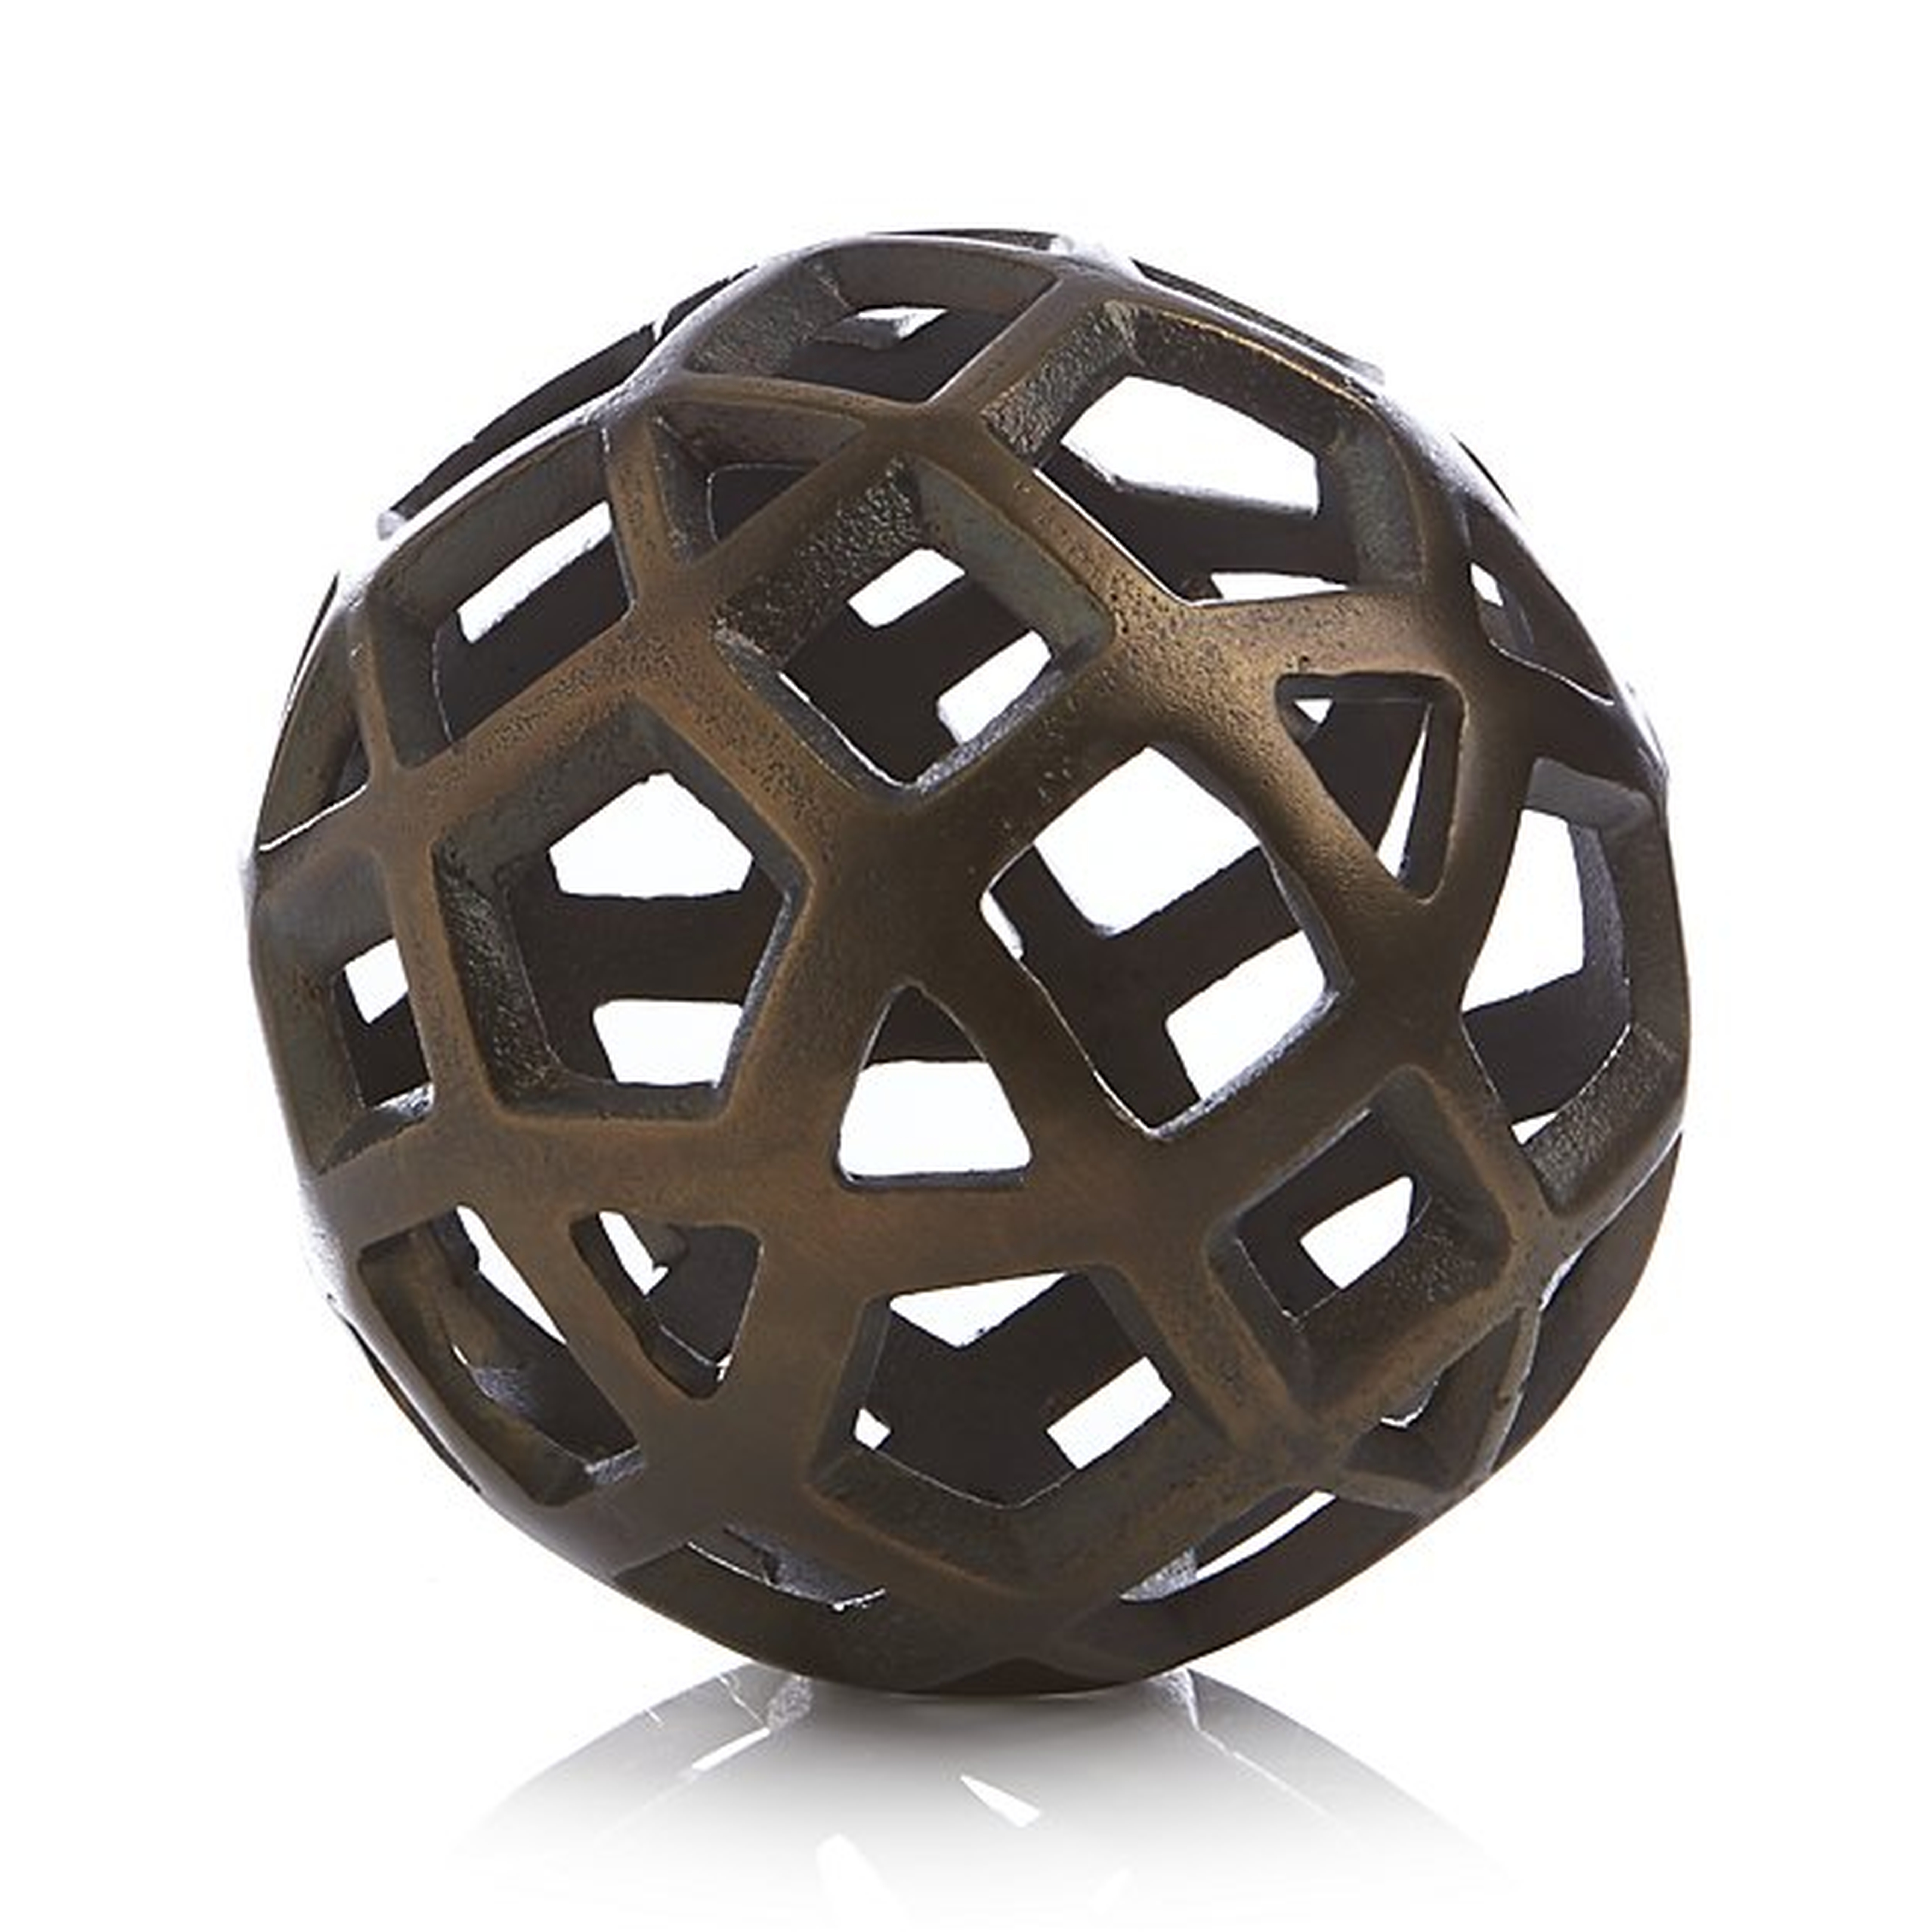 Geo Small Decorative Metal Ball - Crate and Barrel